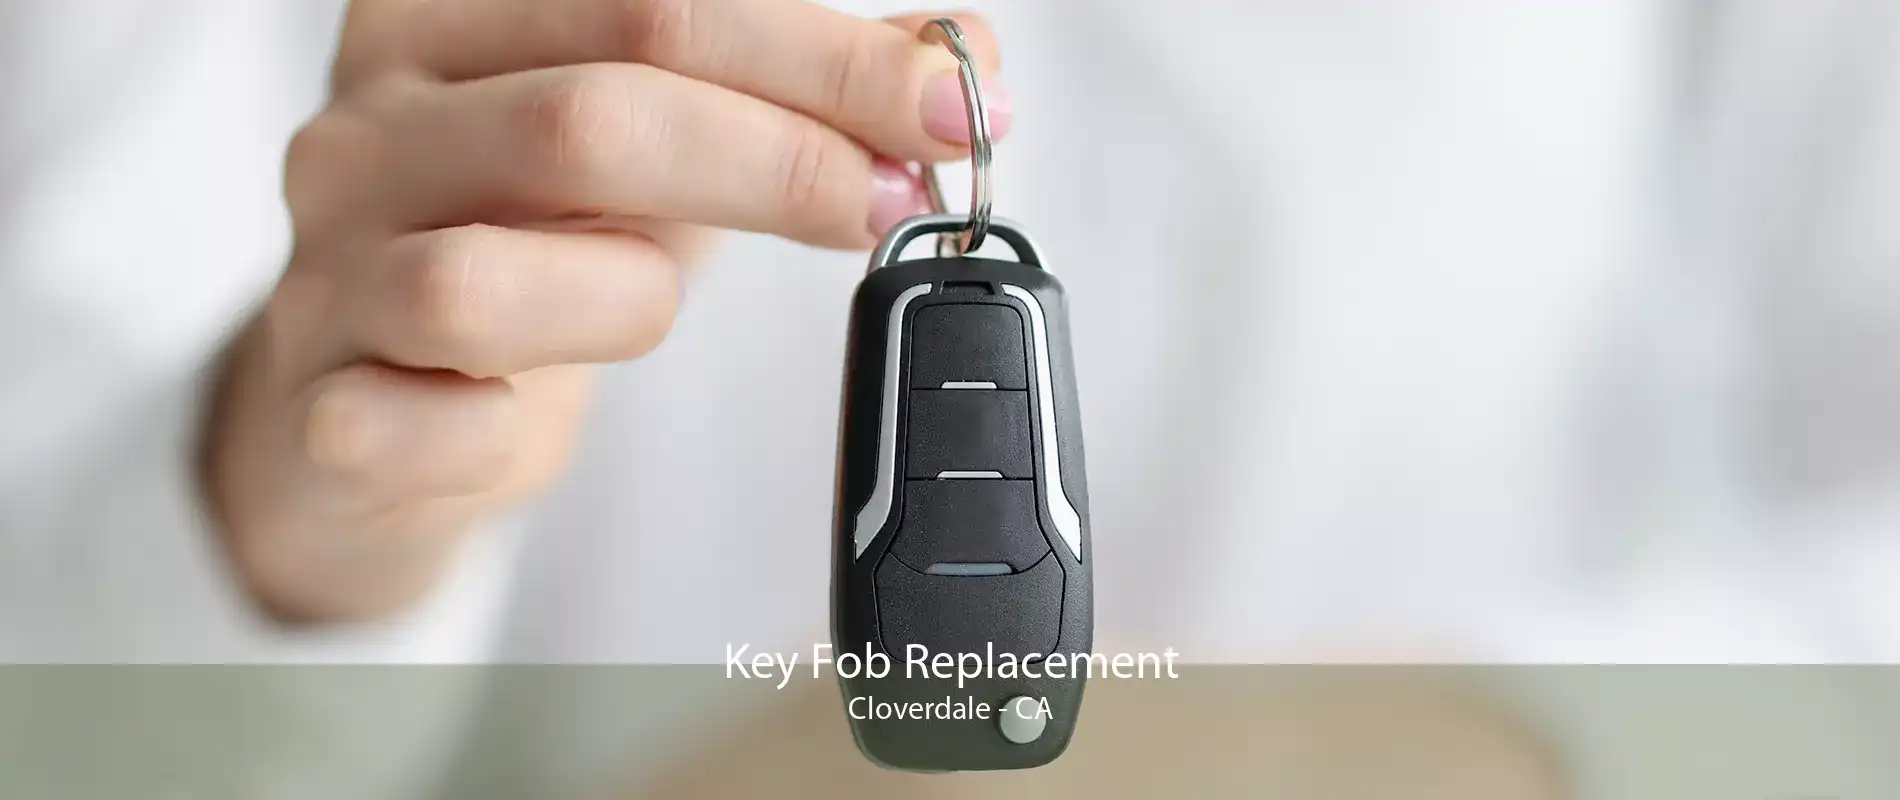 Key Fob Replacement Cloverdale - CA